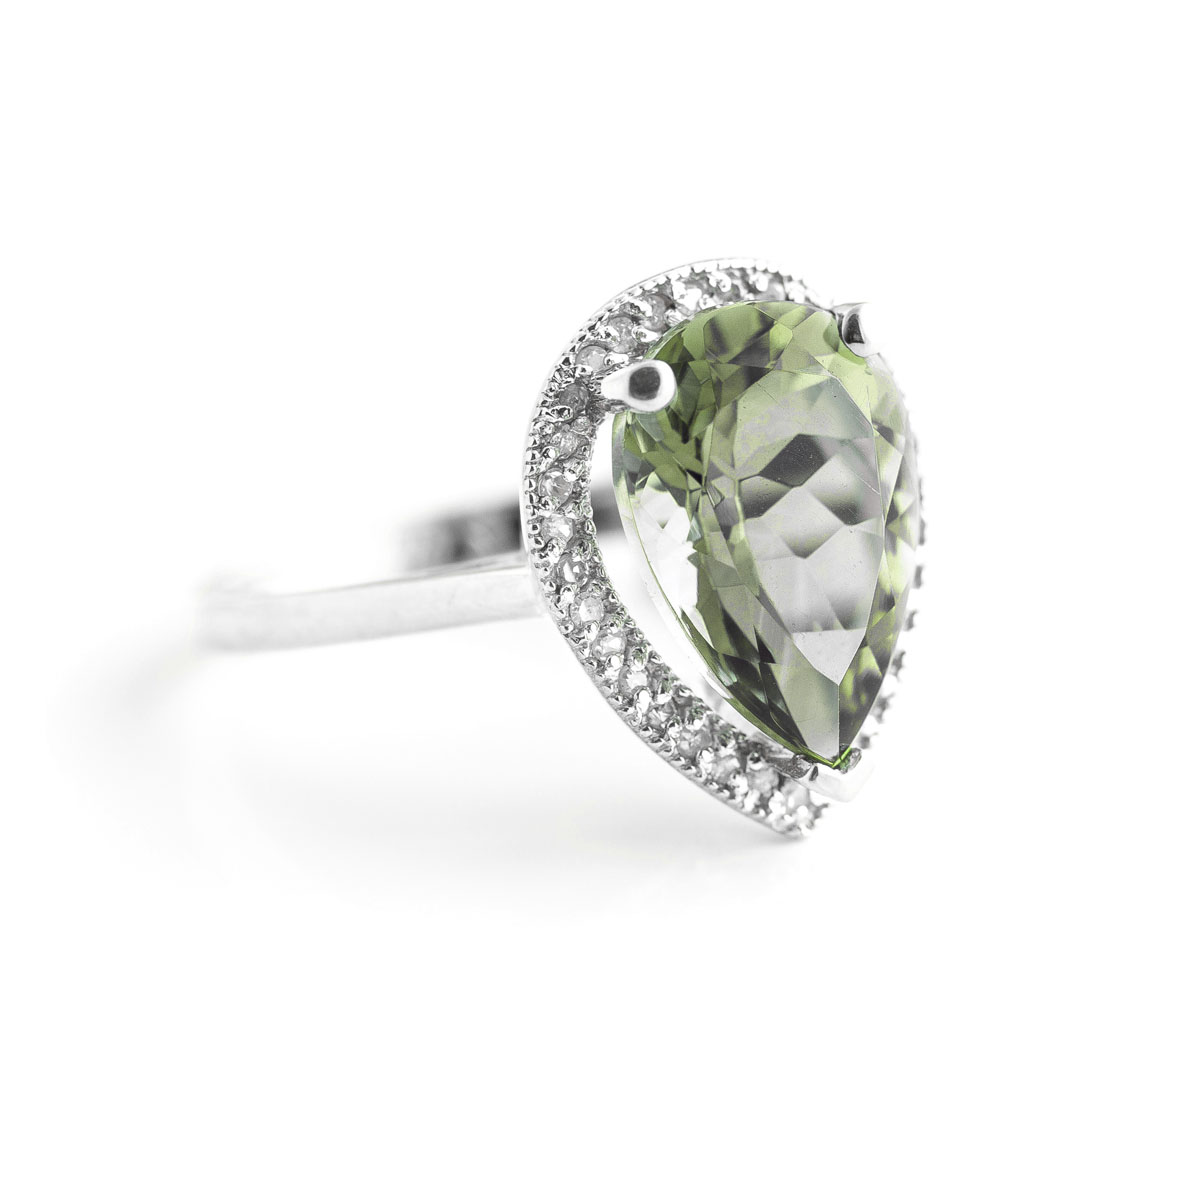 Green Amethyst Halo Ring 3.41 ctw in 9ct White Gold